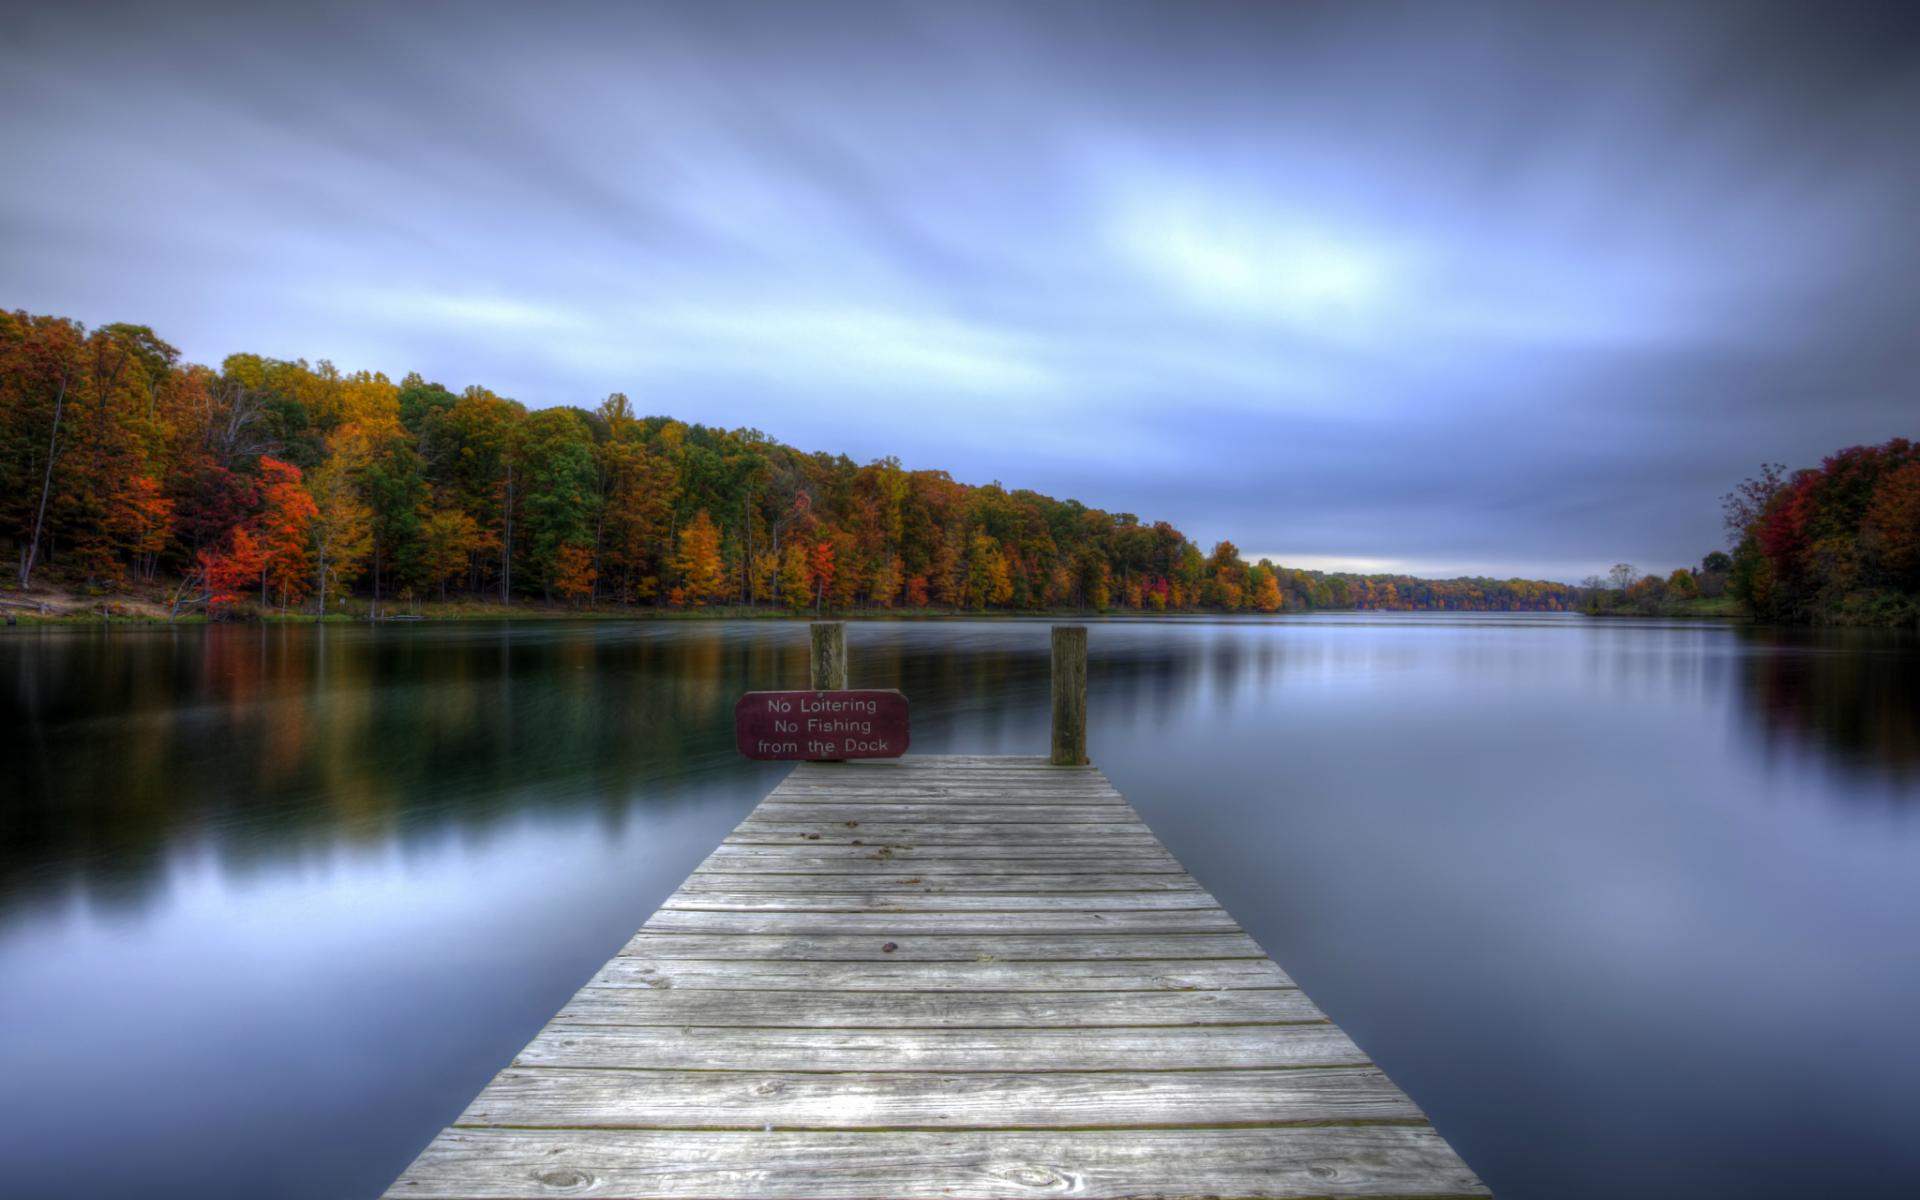 nature, Landscapes, Lakes, Water, Reflection, Dock, Pier, Shore, Hdr, Trees, Forests, Autumn, Fall, Seasons, Sky, Clouds, Signs, Leaves, Scenic Wallpaper